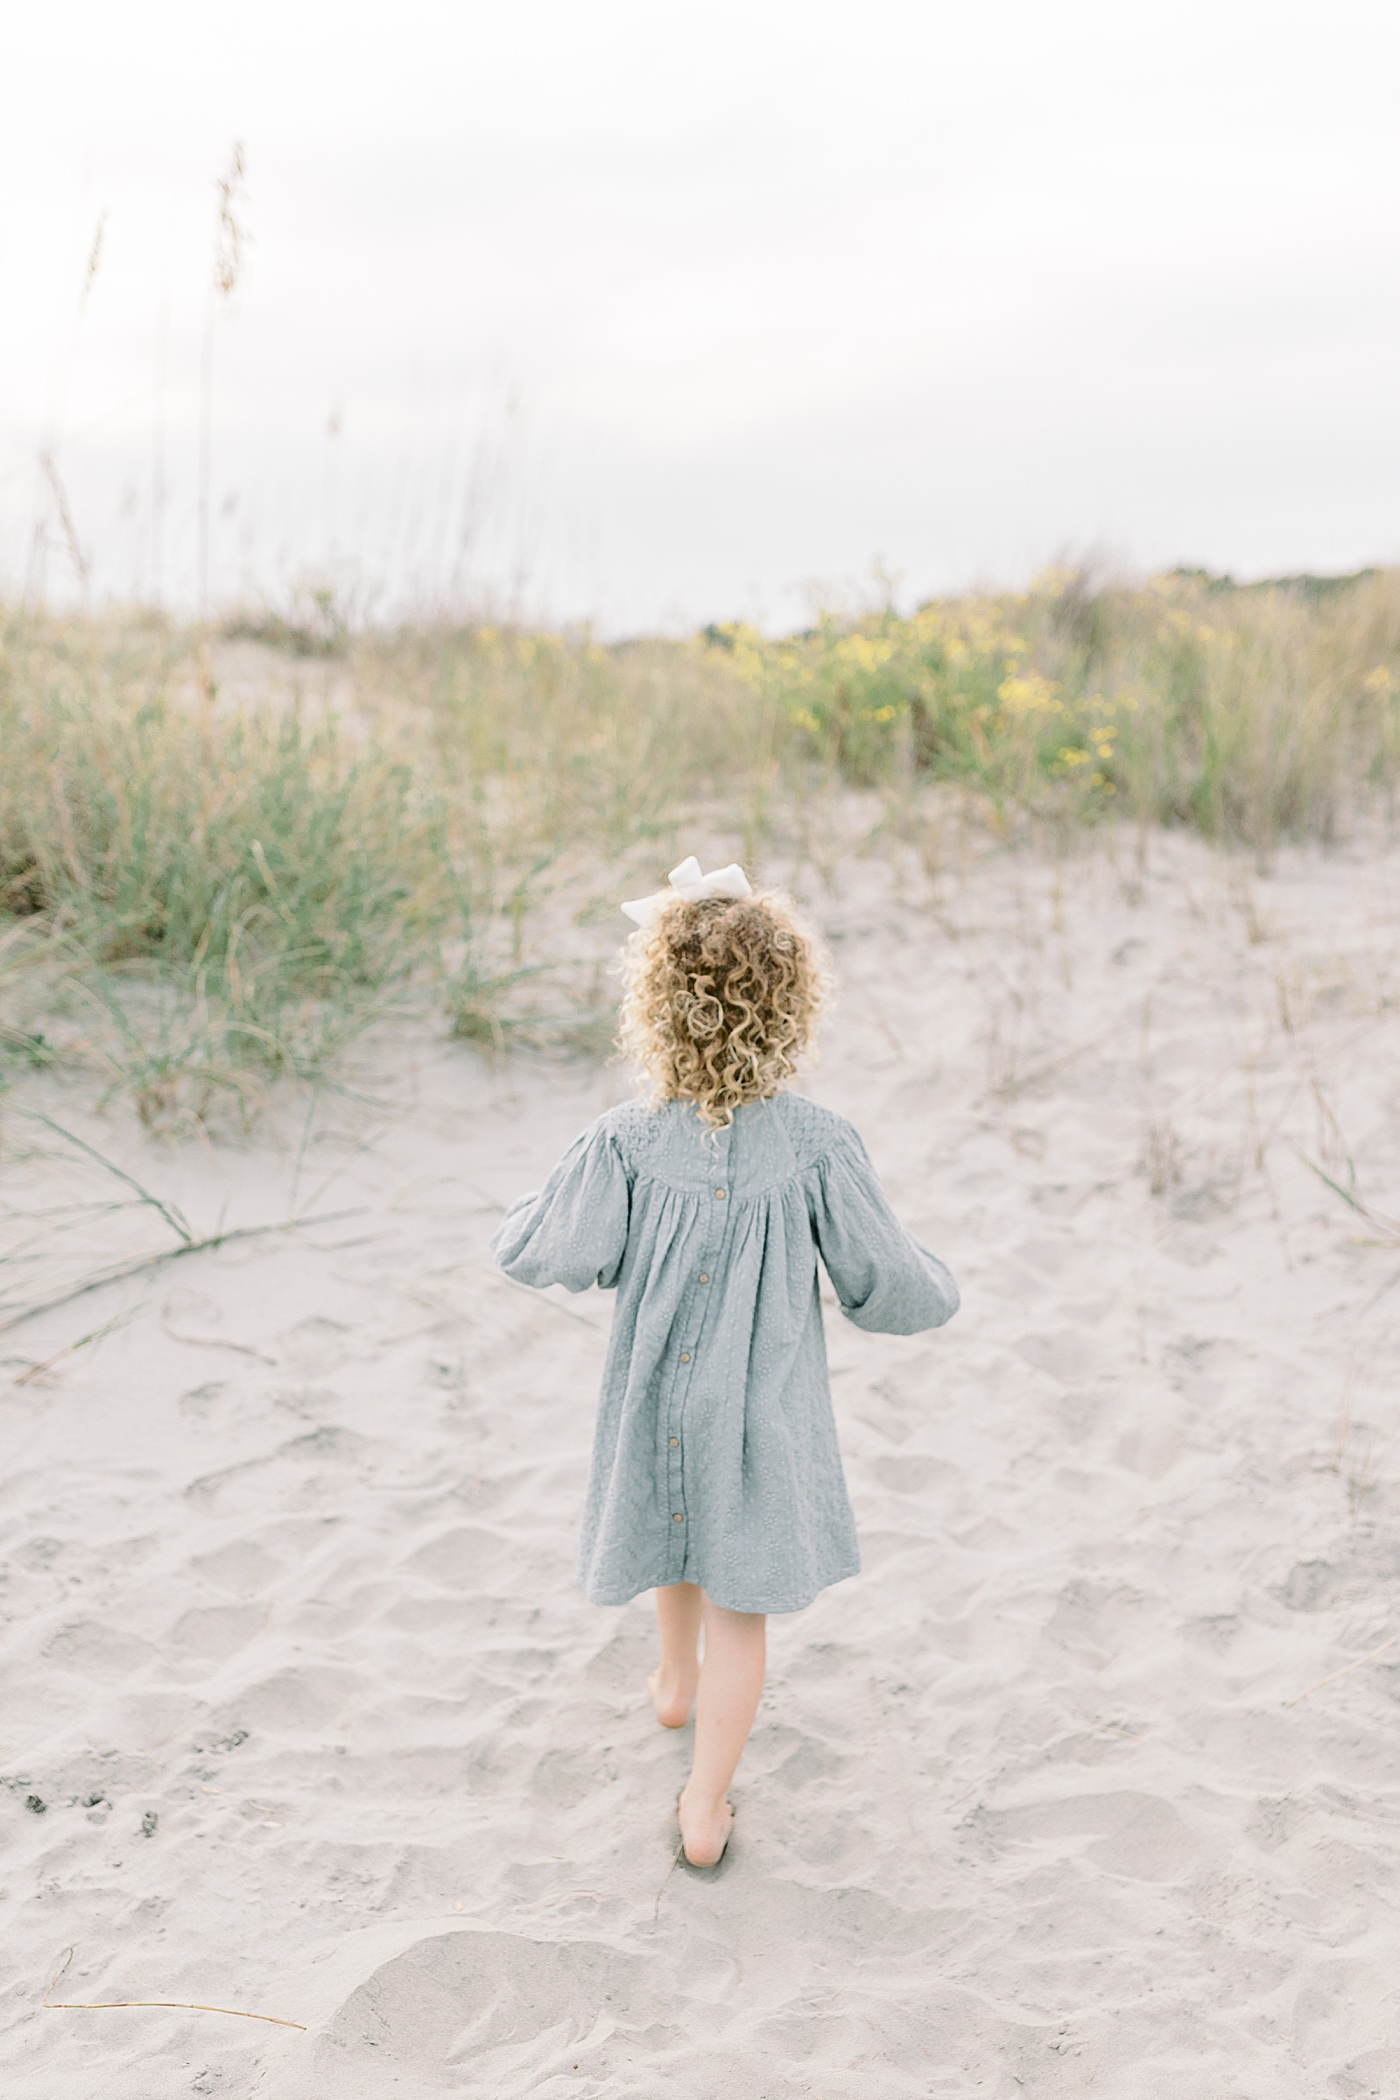 Little girl in a blue dress walking near the sand dunes | Photo by Caitlyn Motycka Photography